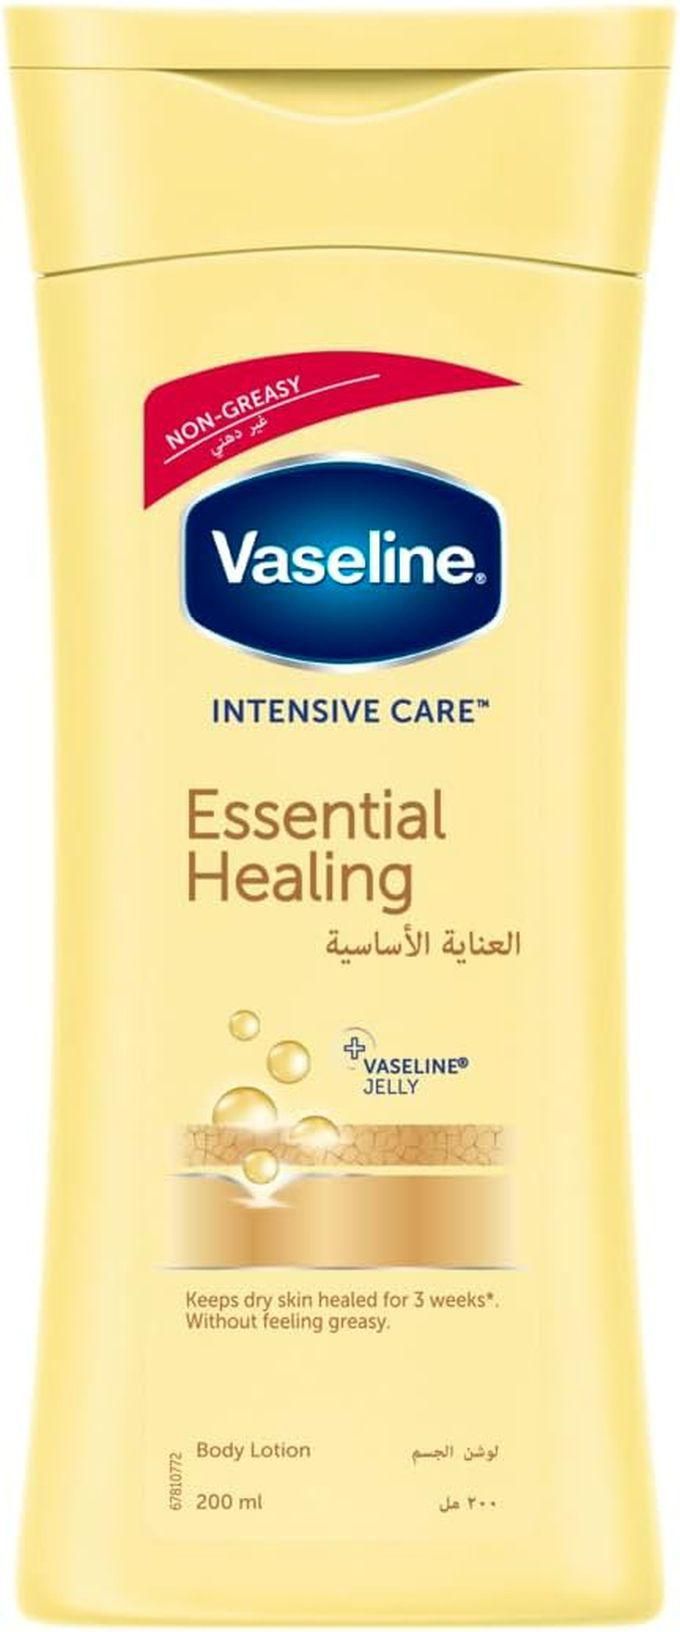 Vaseline Lotion Intensive Care Essential Healing 200ml